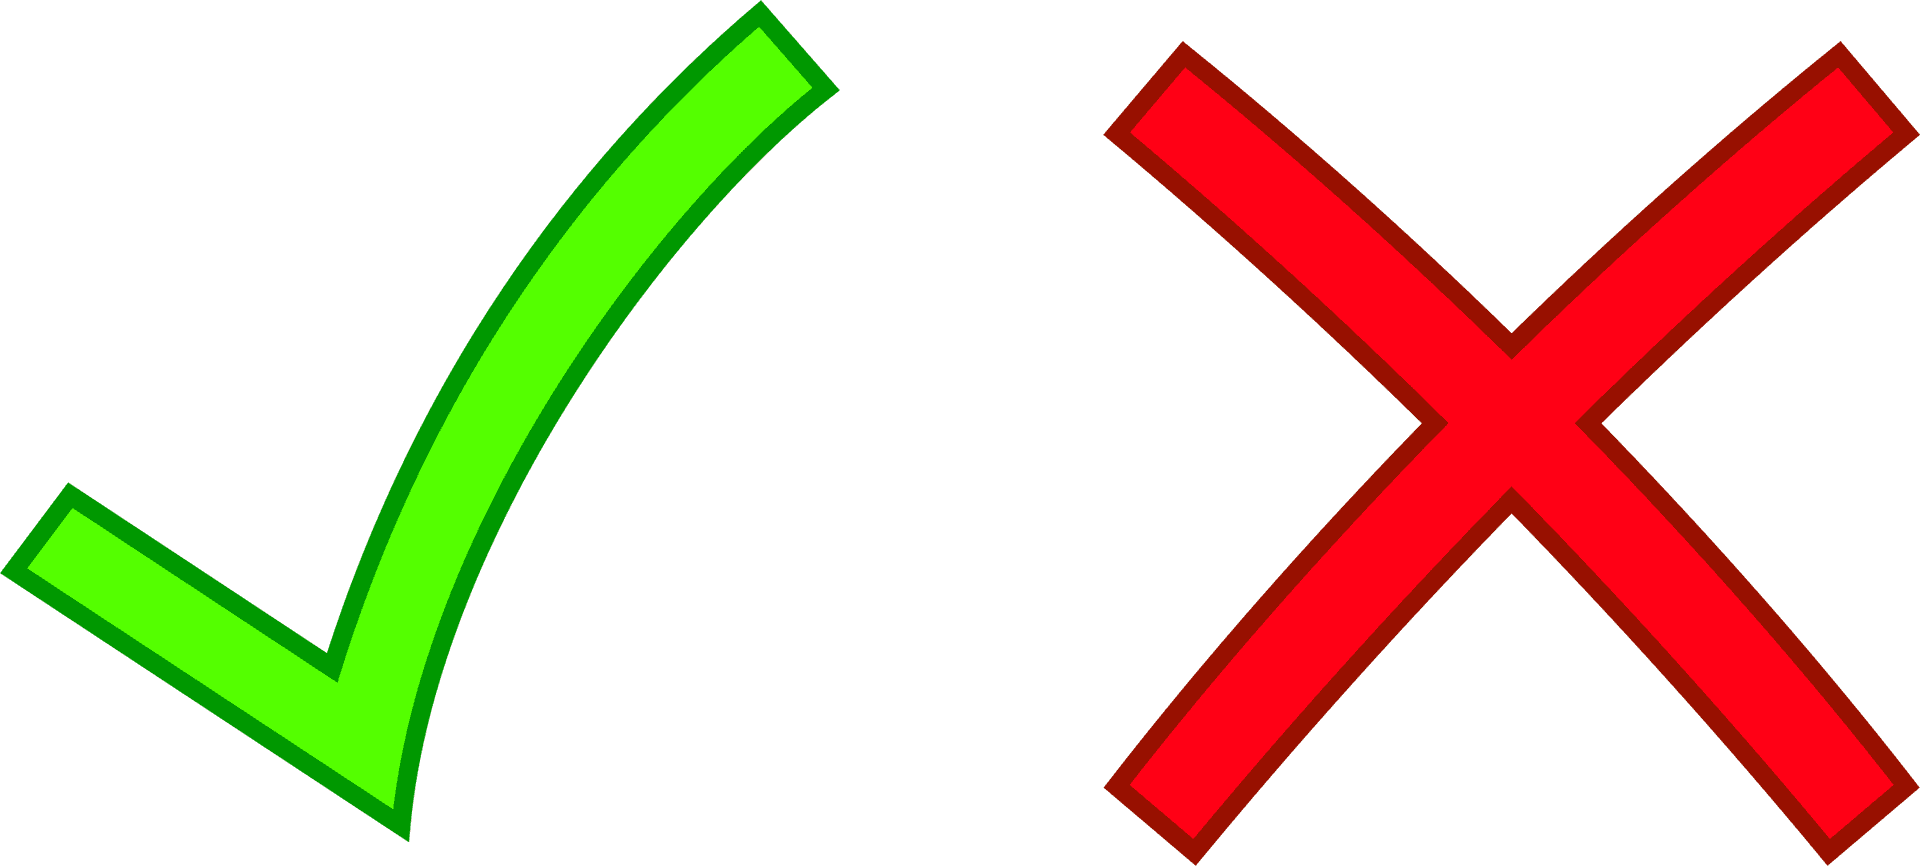 Checkmarkand Cross Signs PNG image